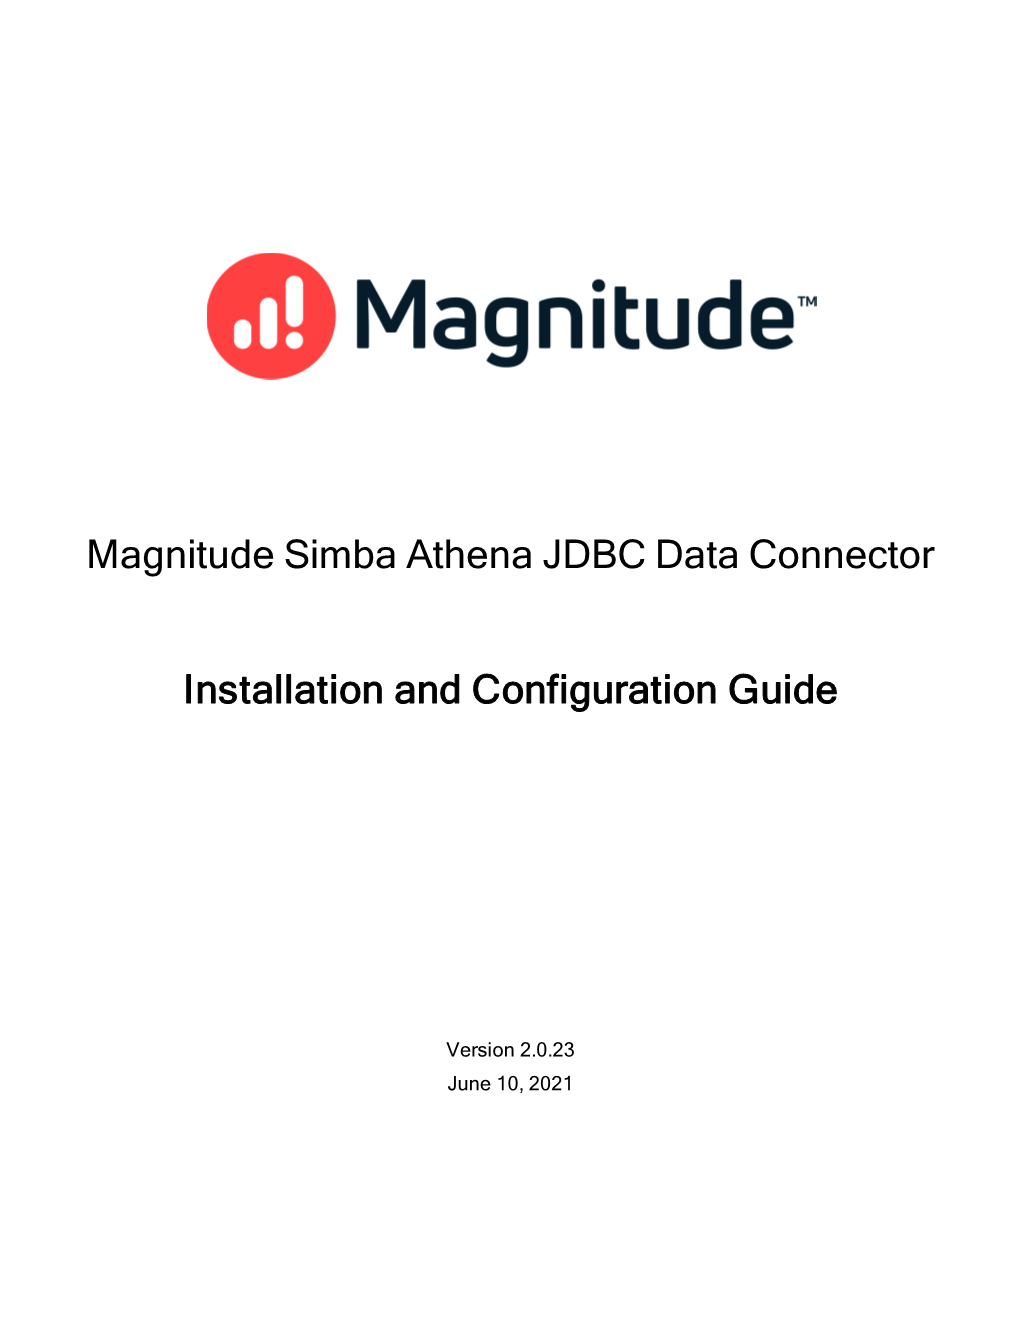 Simba Athena JDBC Connector Installation and Configuration Guide